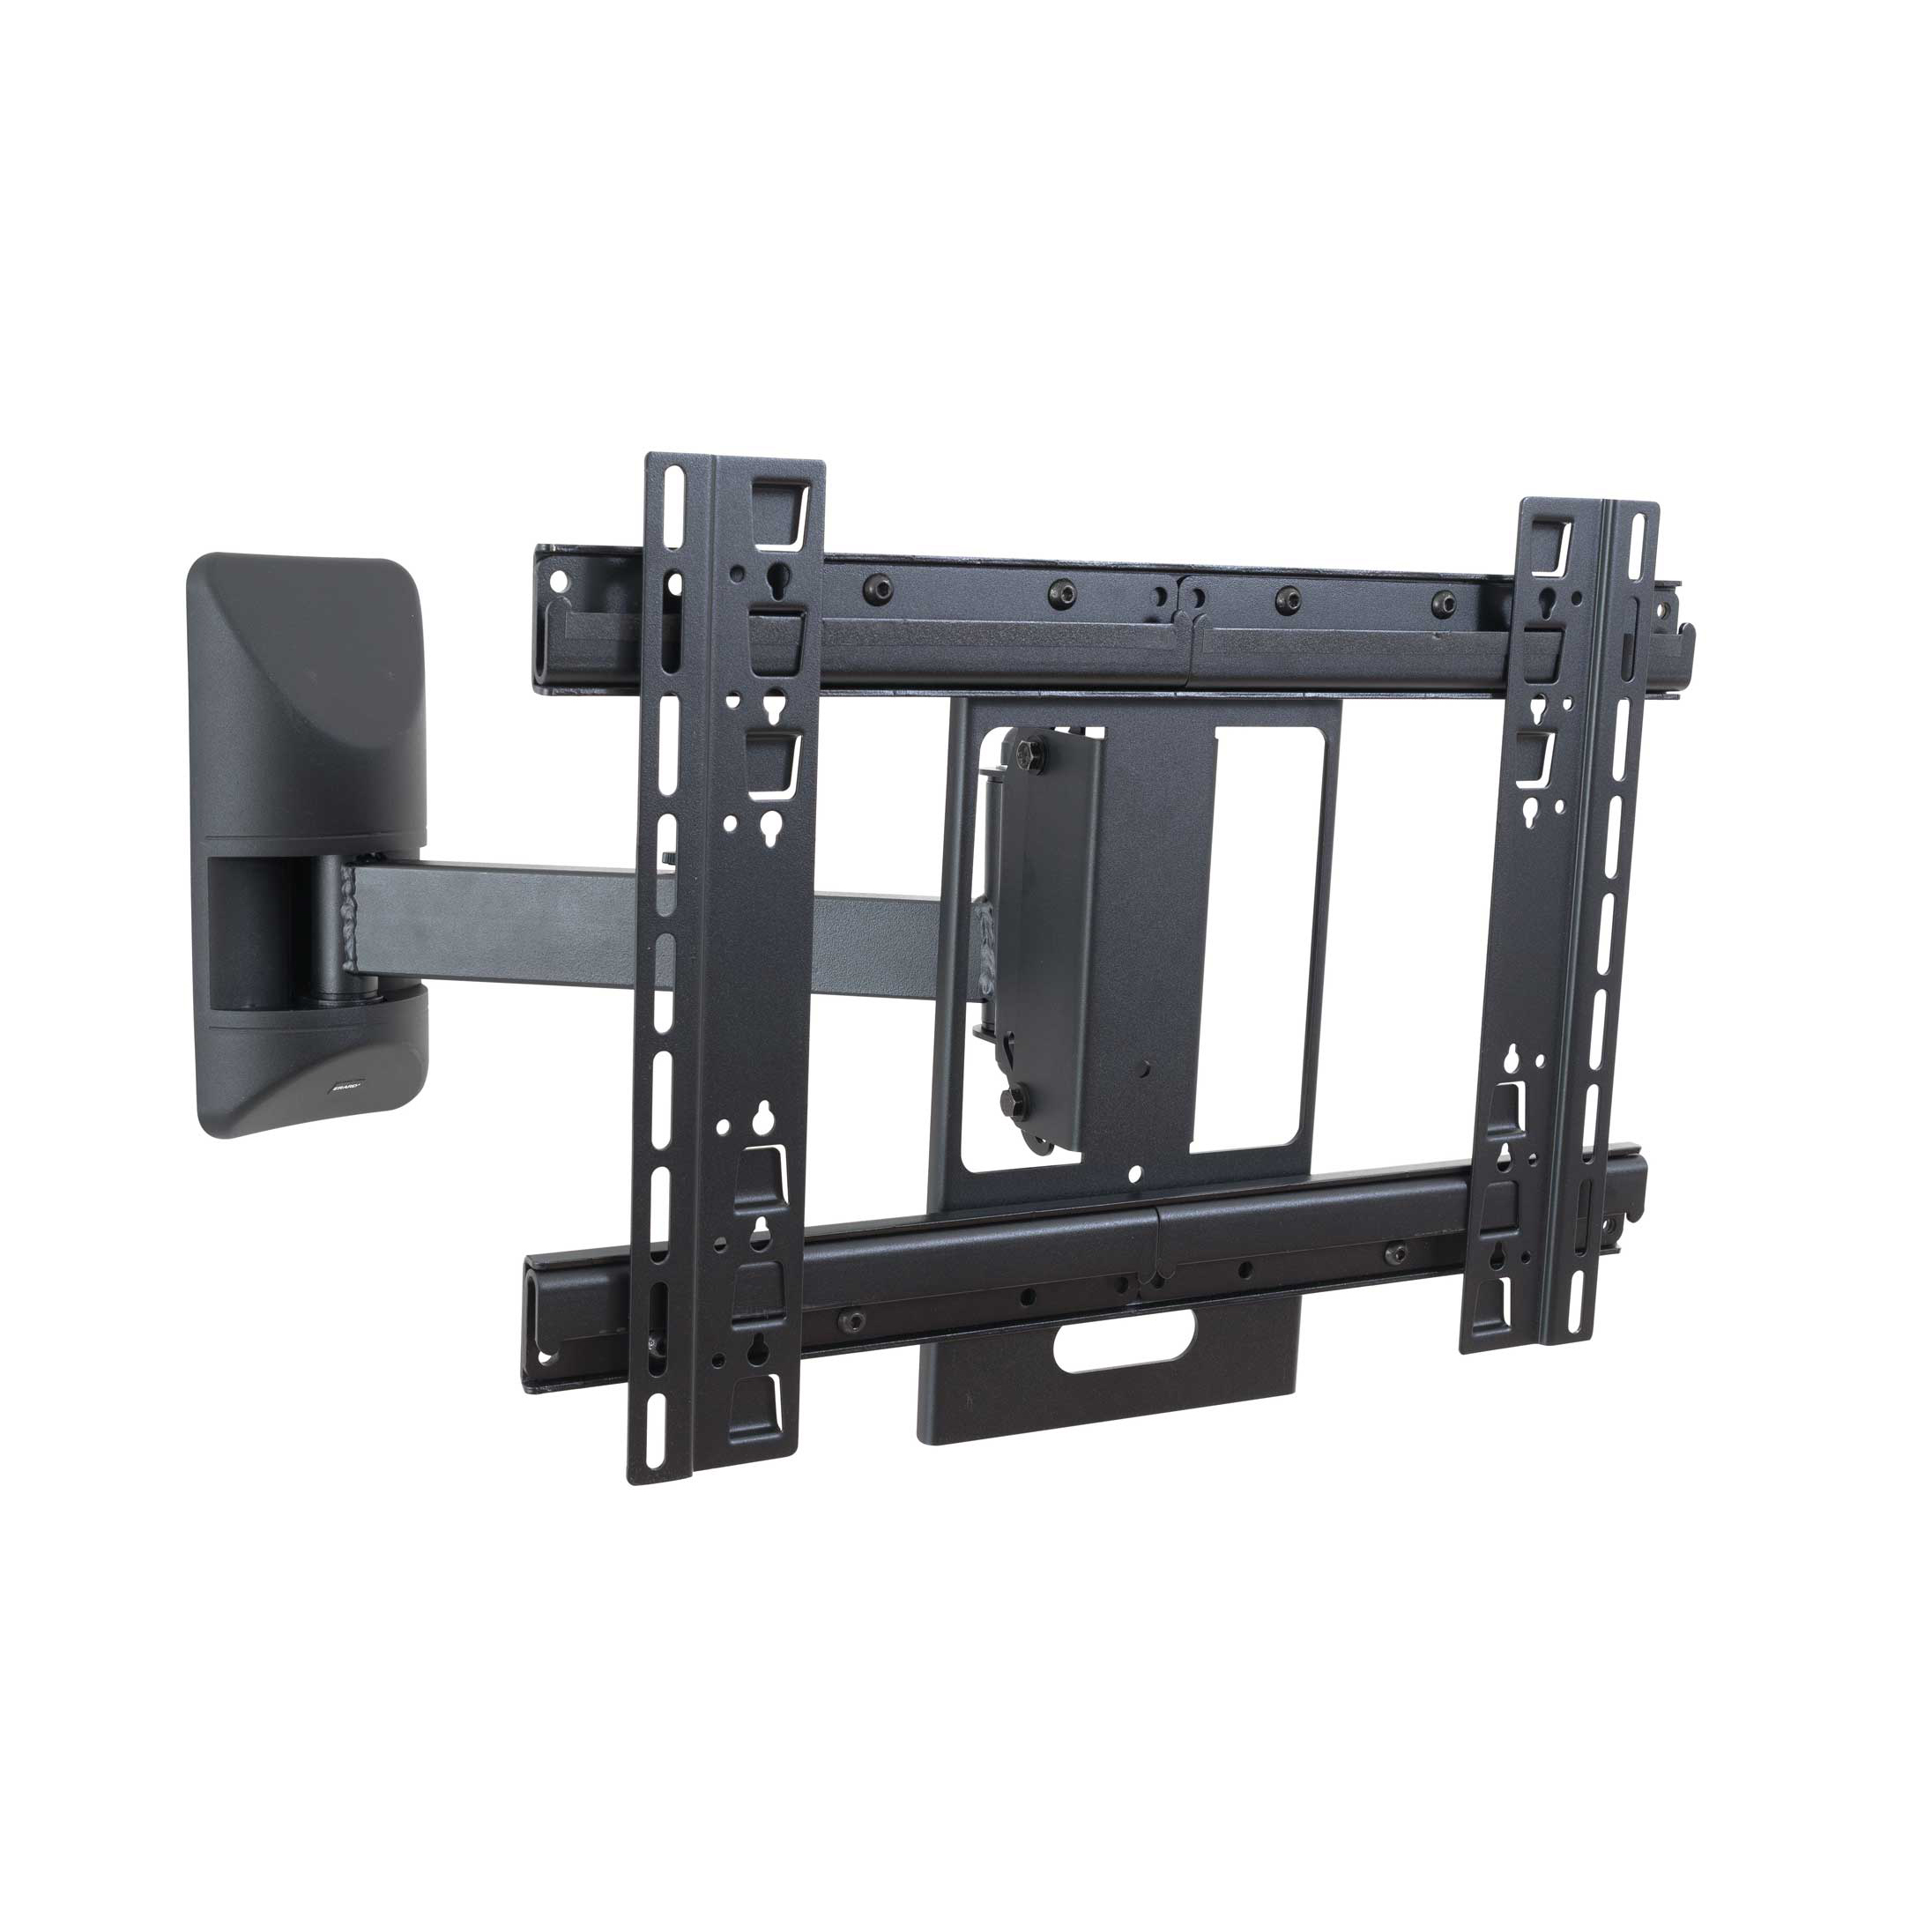 APPLIK TILTING AND SWIVELING - tilting and swiveling wall mount with offset